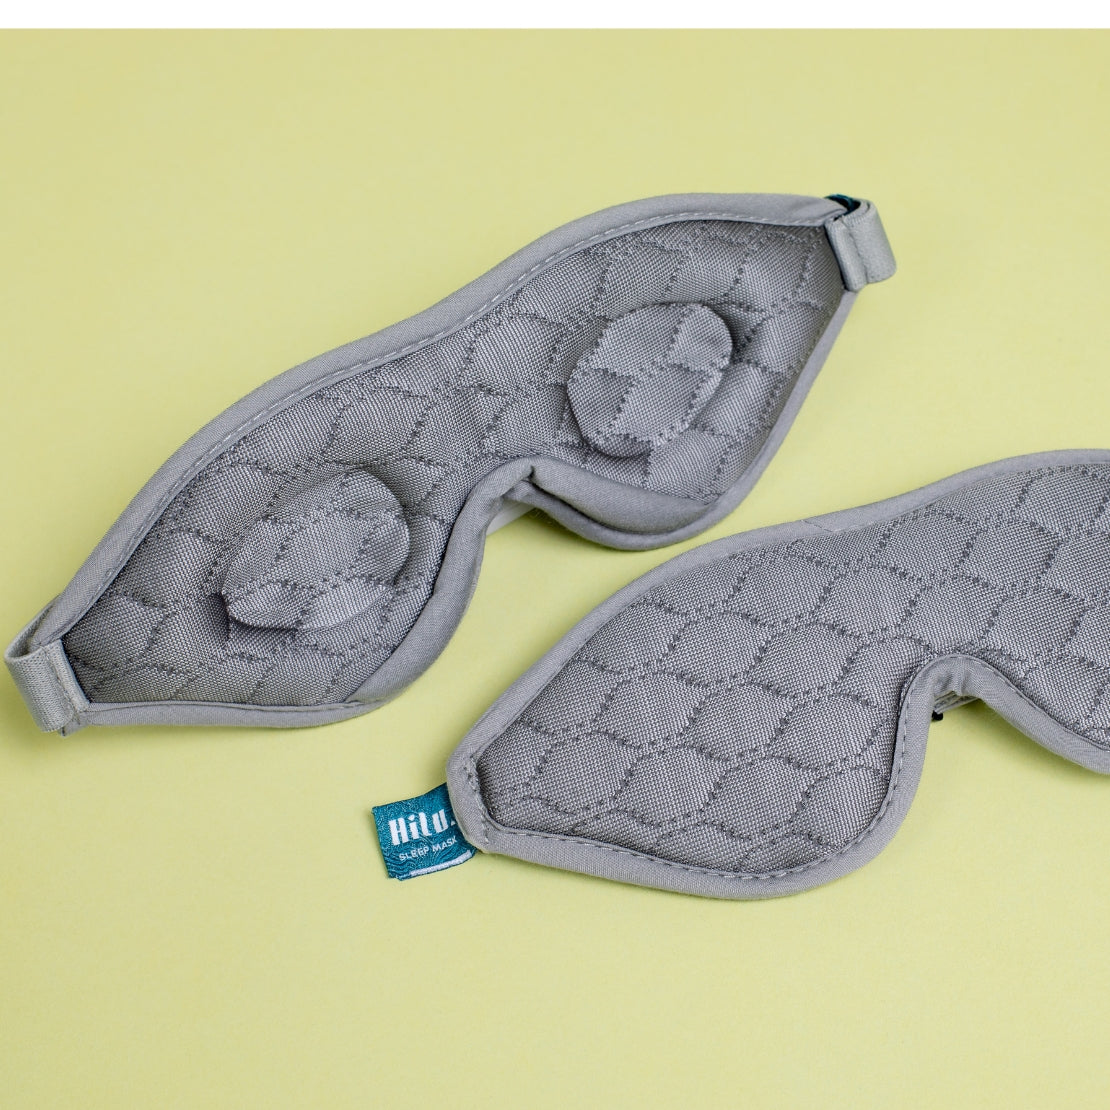 Two gray sleeping masks with textured quilted patterns, placed on a light yellow background. One mask is flipped to show the inner soft cushioning. 